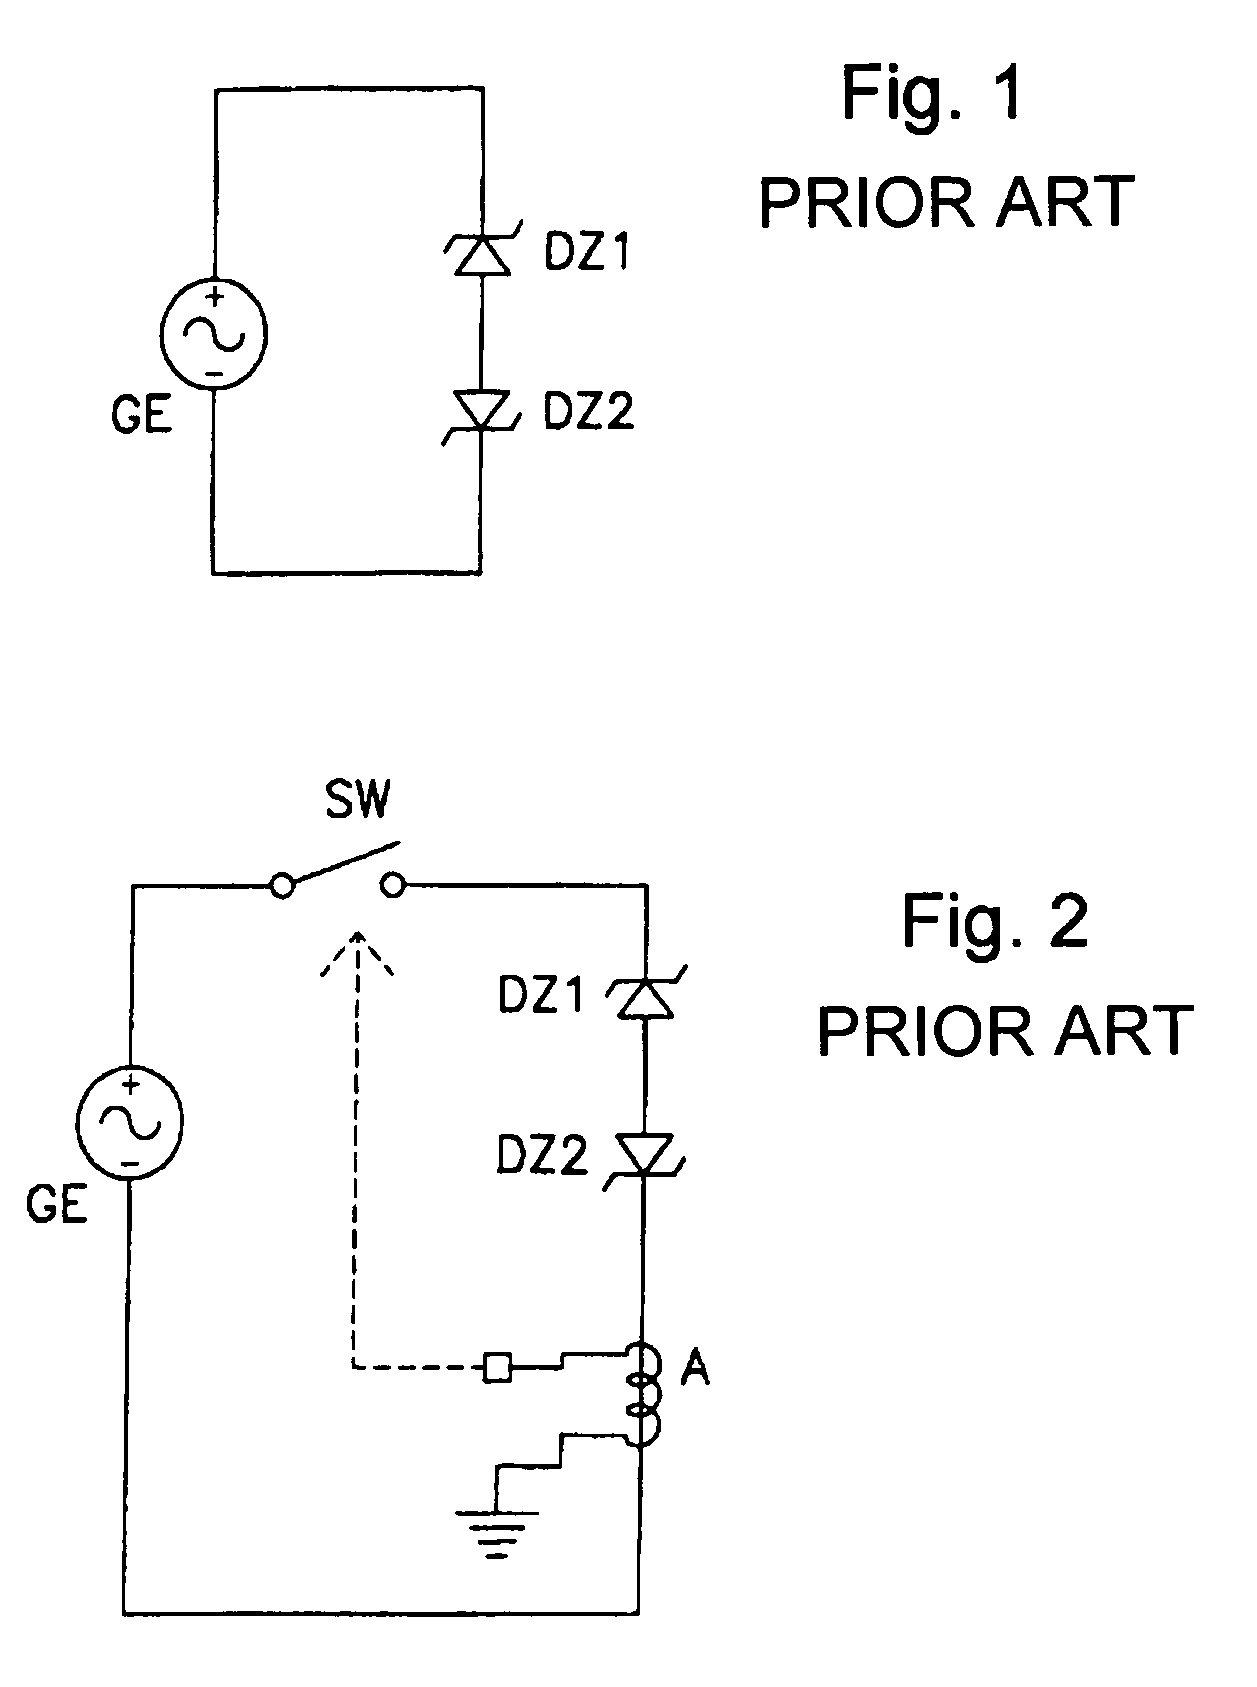 Voltage clamping circuit for a bicycle dynamo